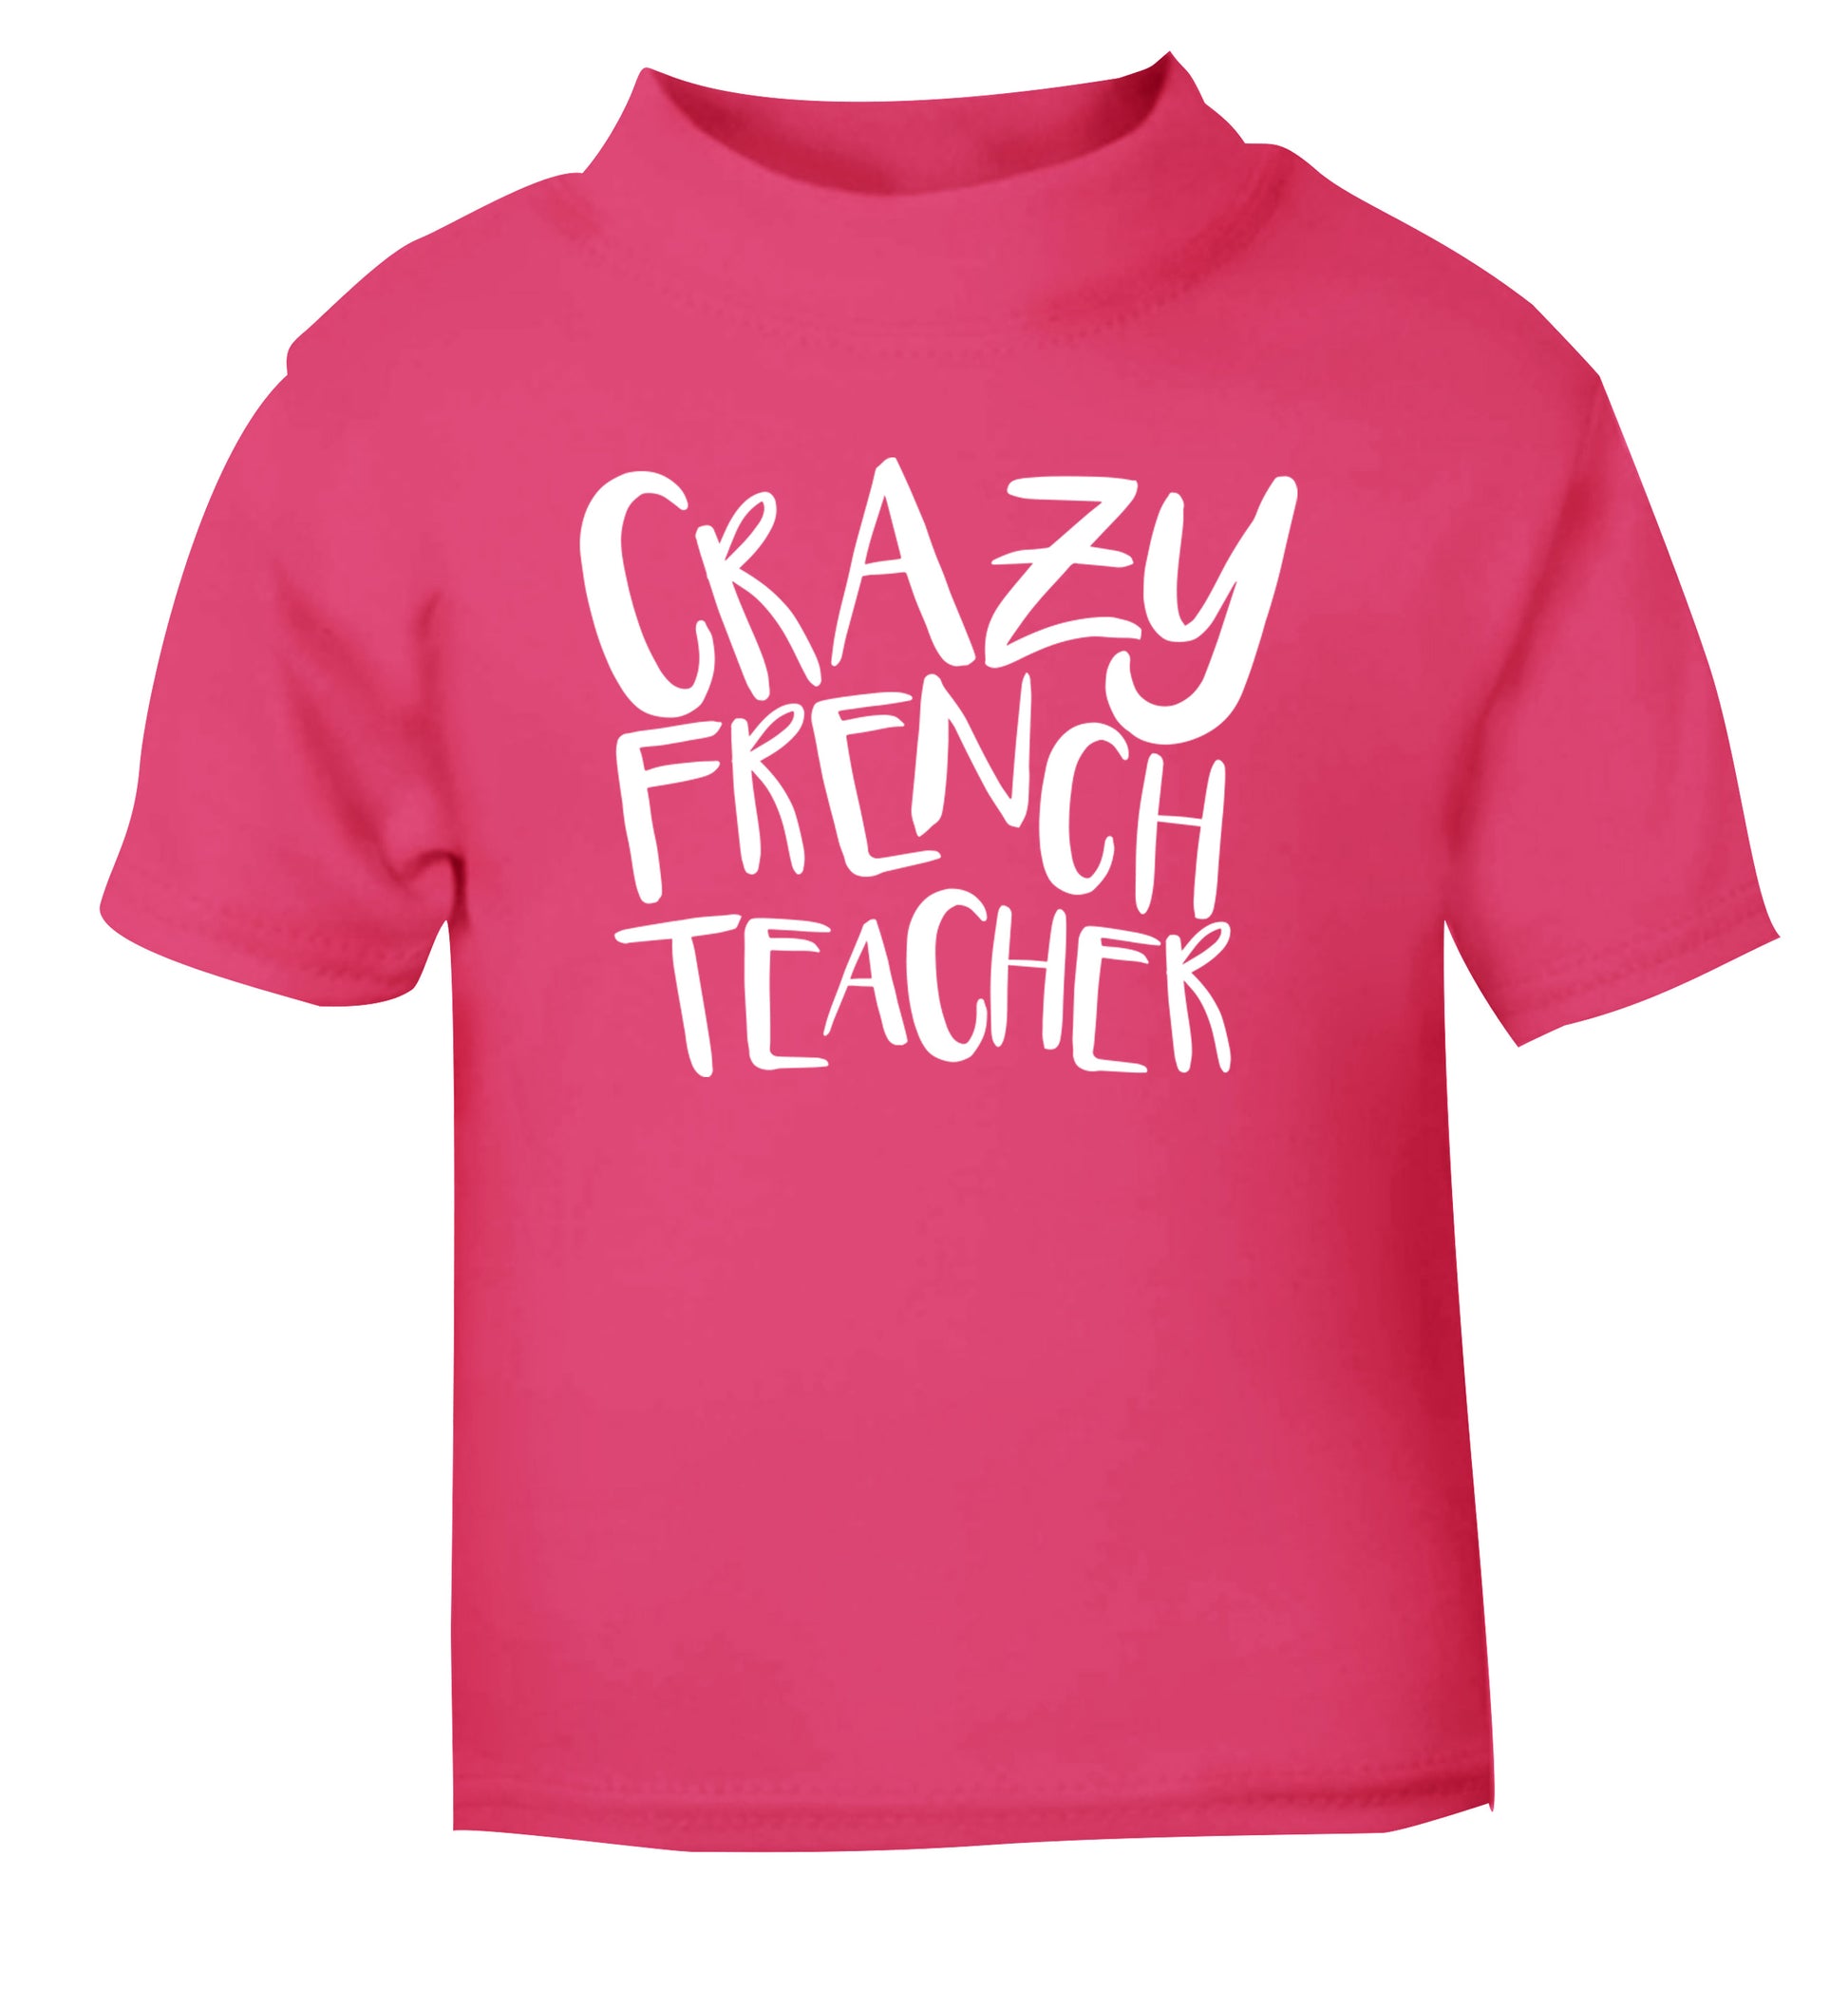 Crazy french teacher pink Baby Toddler Tshirt 2 Years